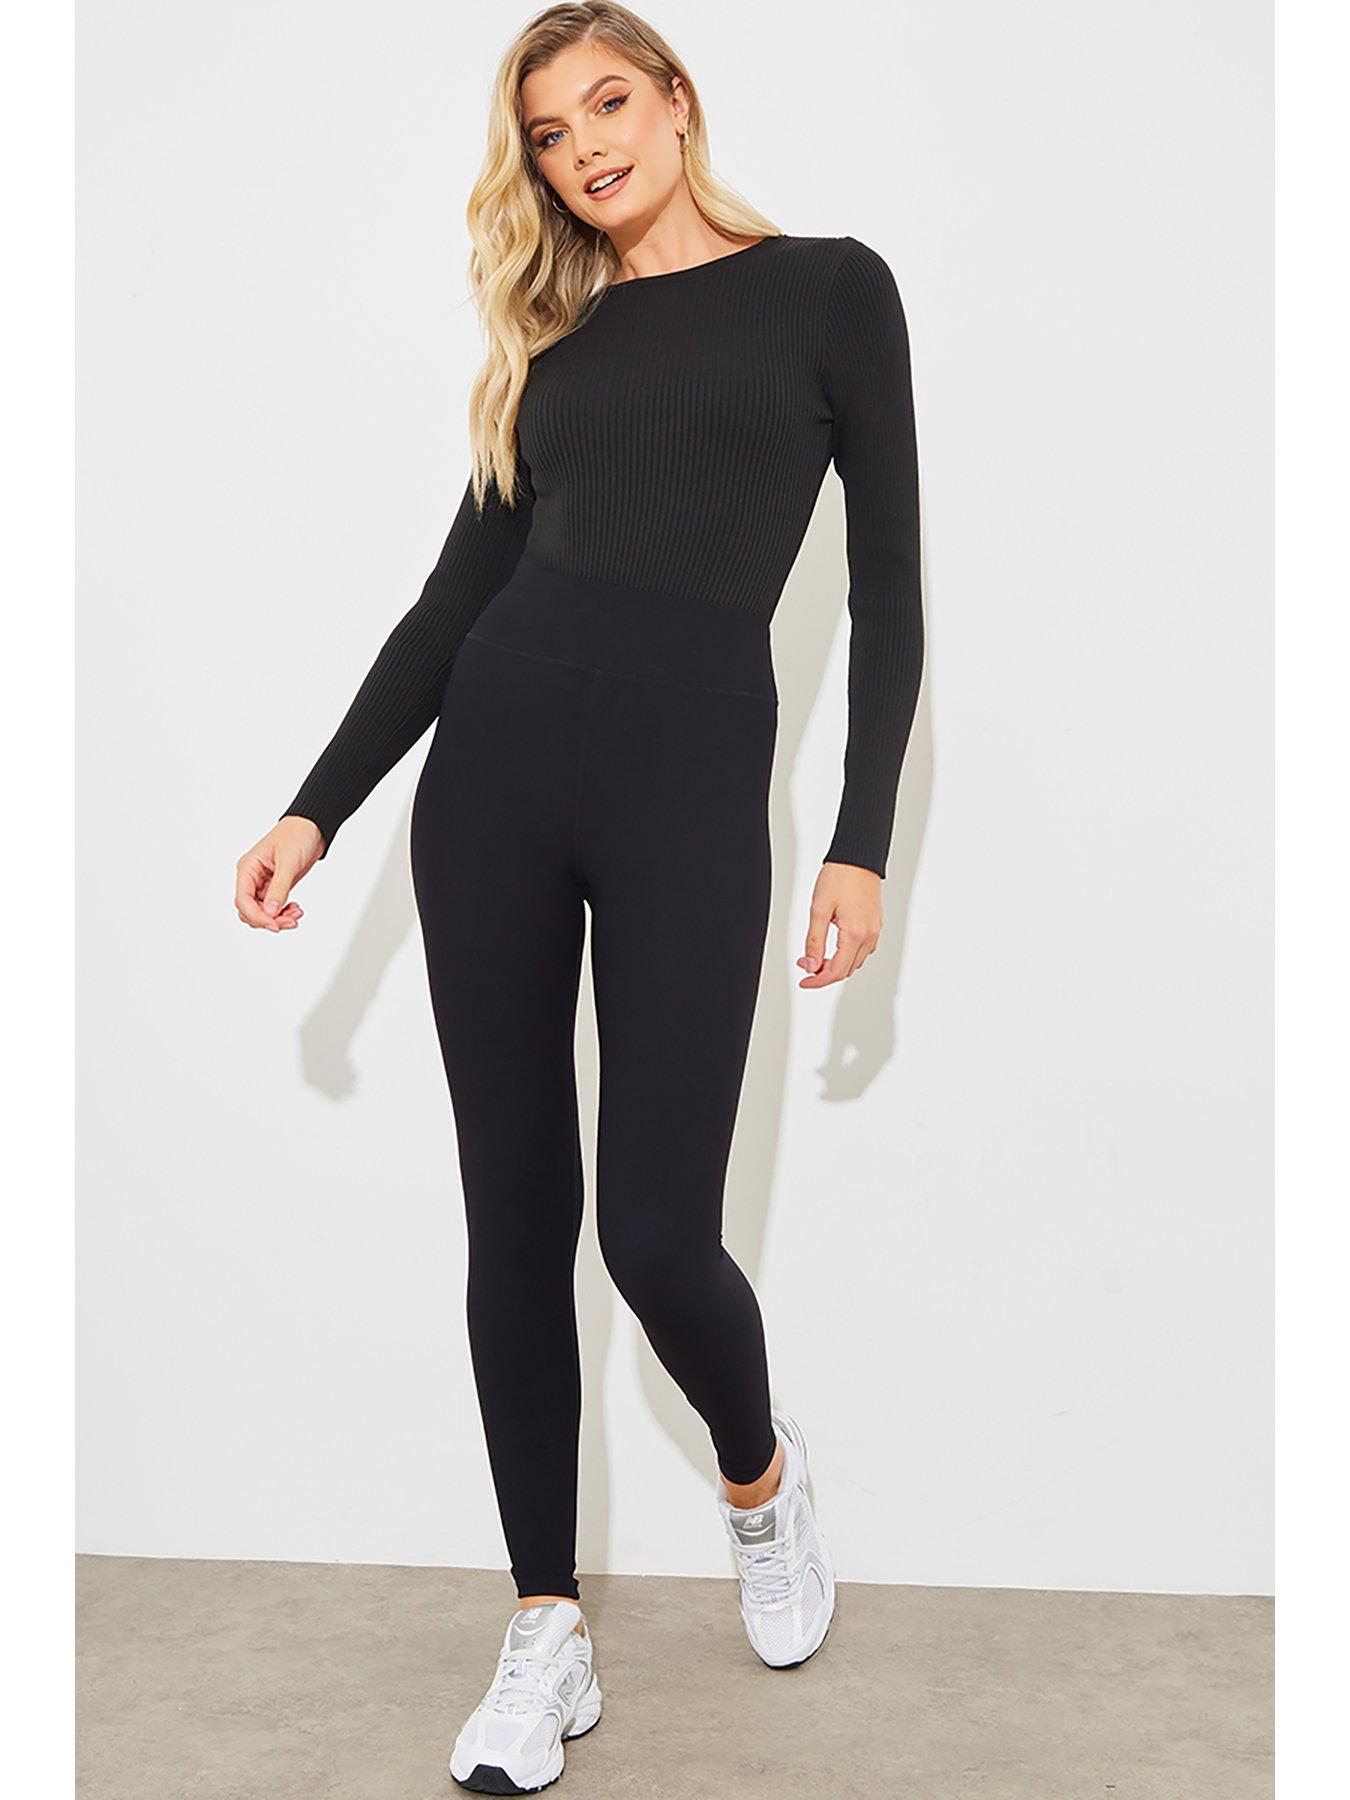 Free People Movement You're A Peach - Black Active Leggings - Lulus